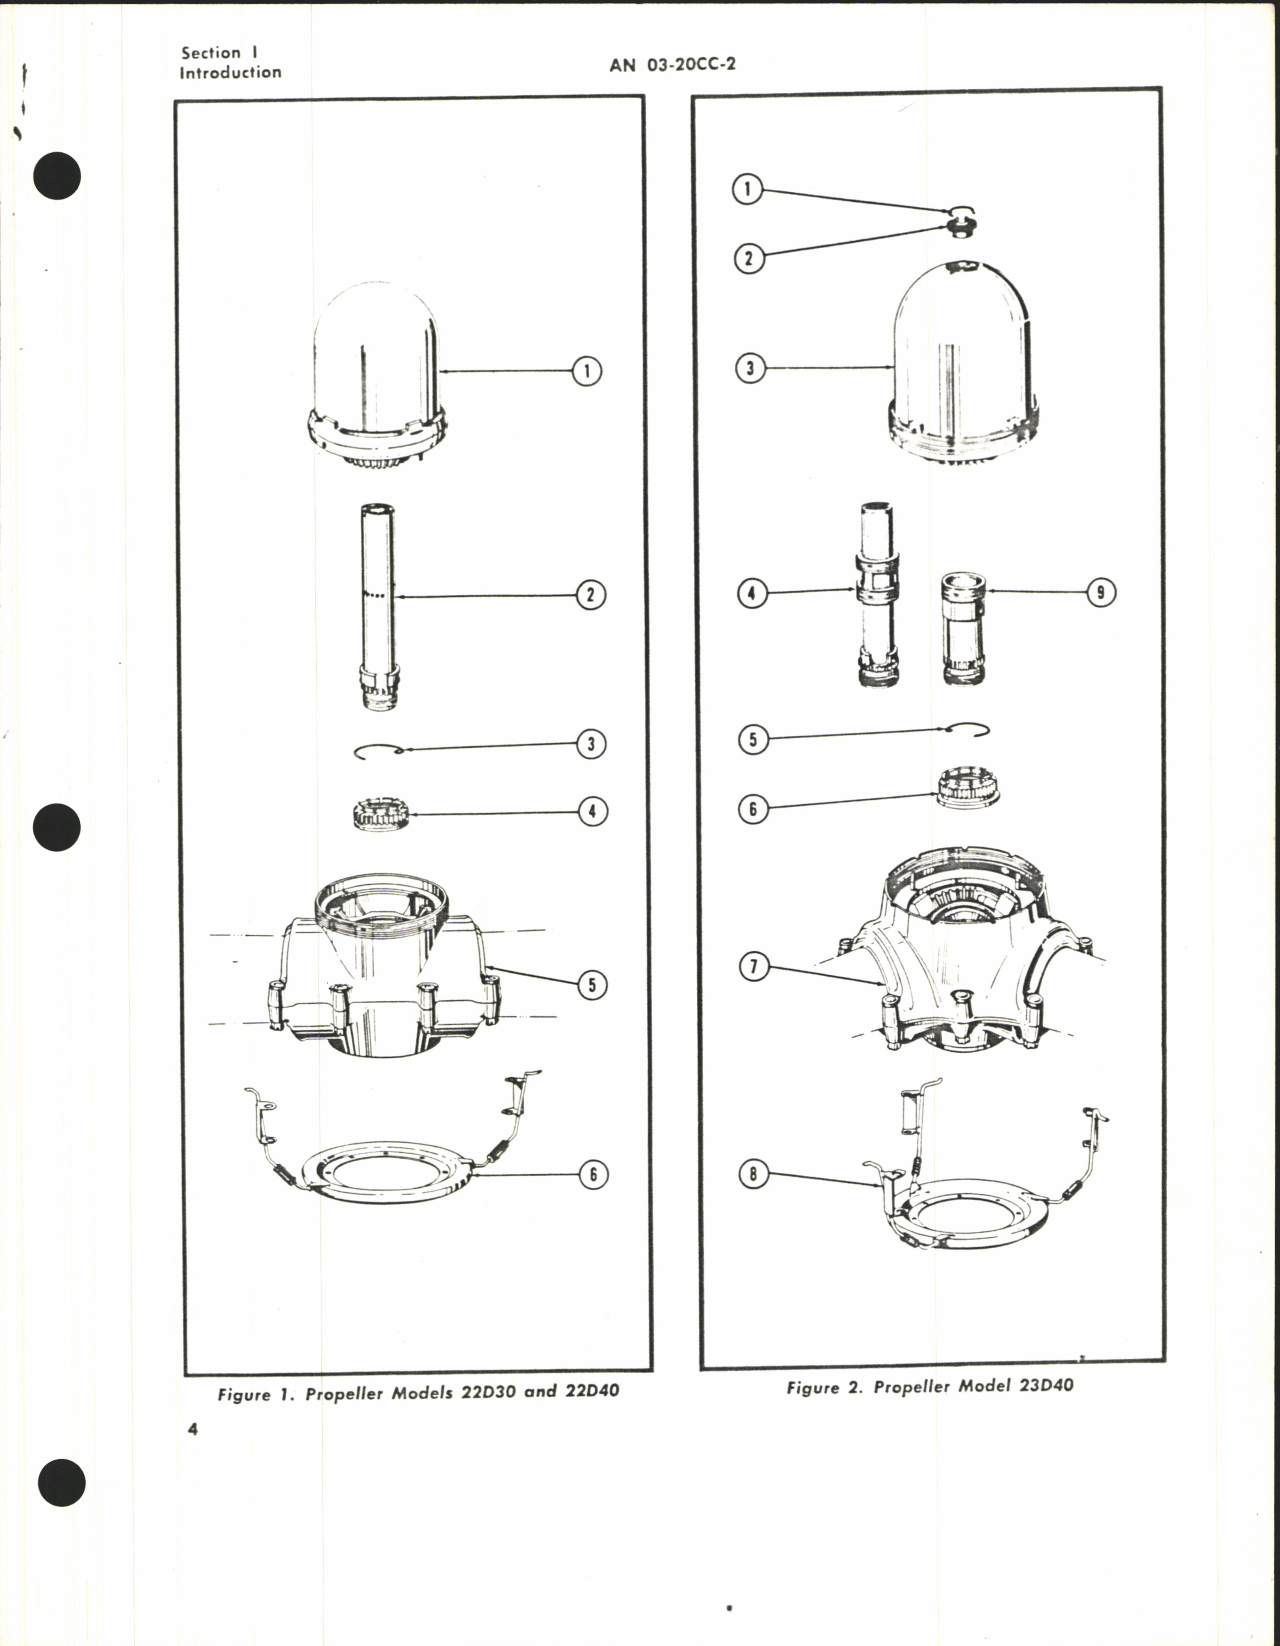 Sample page 8 from AirCorps Library document: Parts Catalog for Hydromatic Propellers